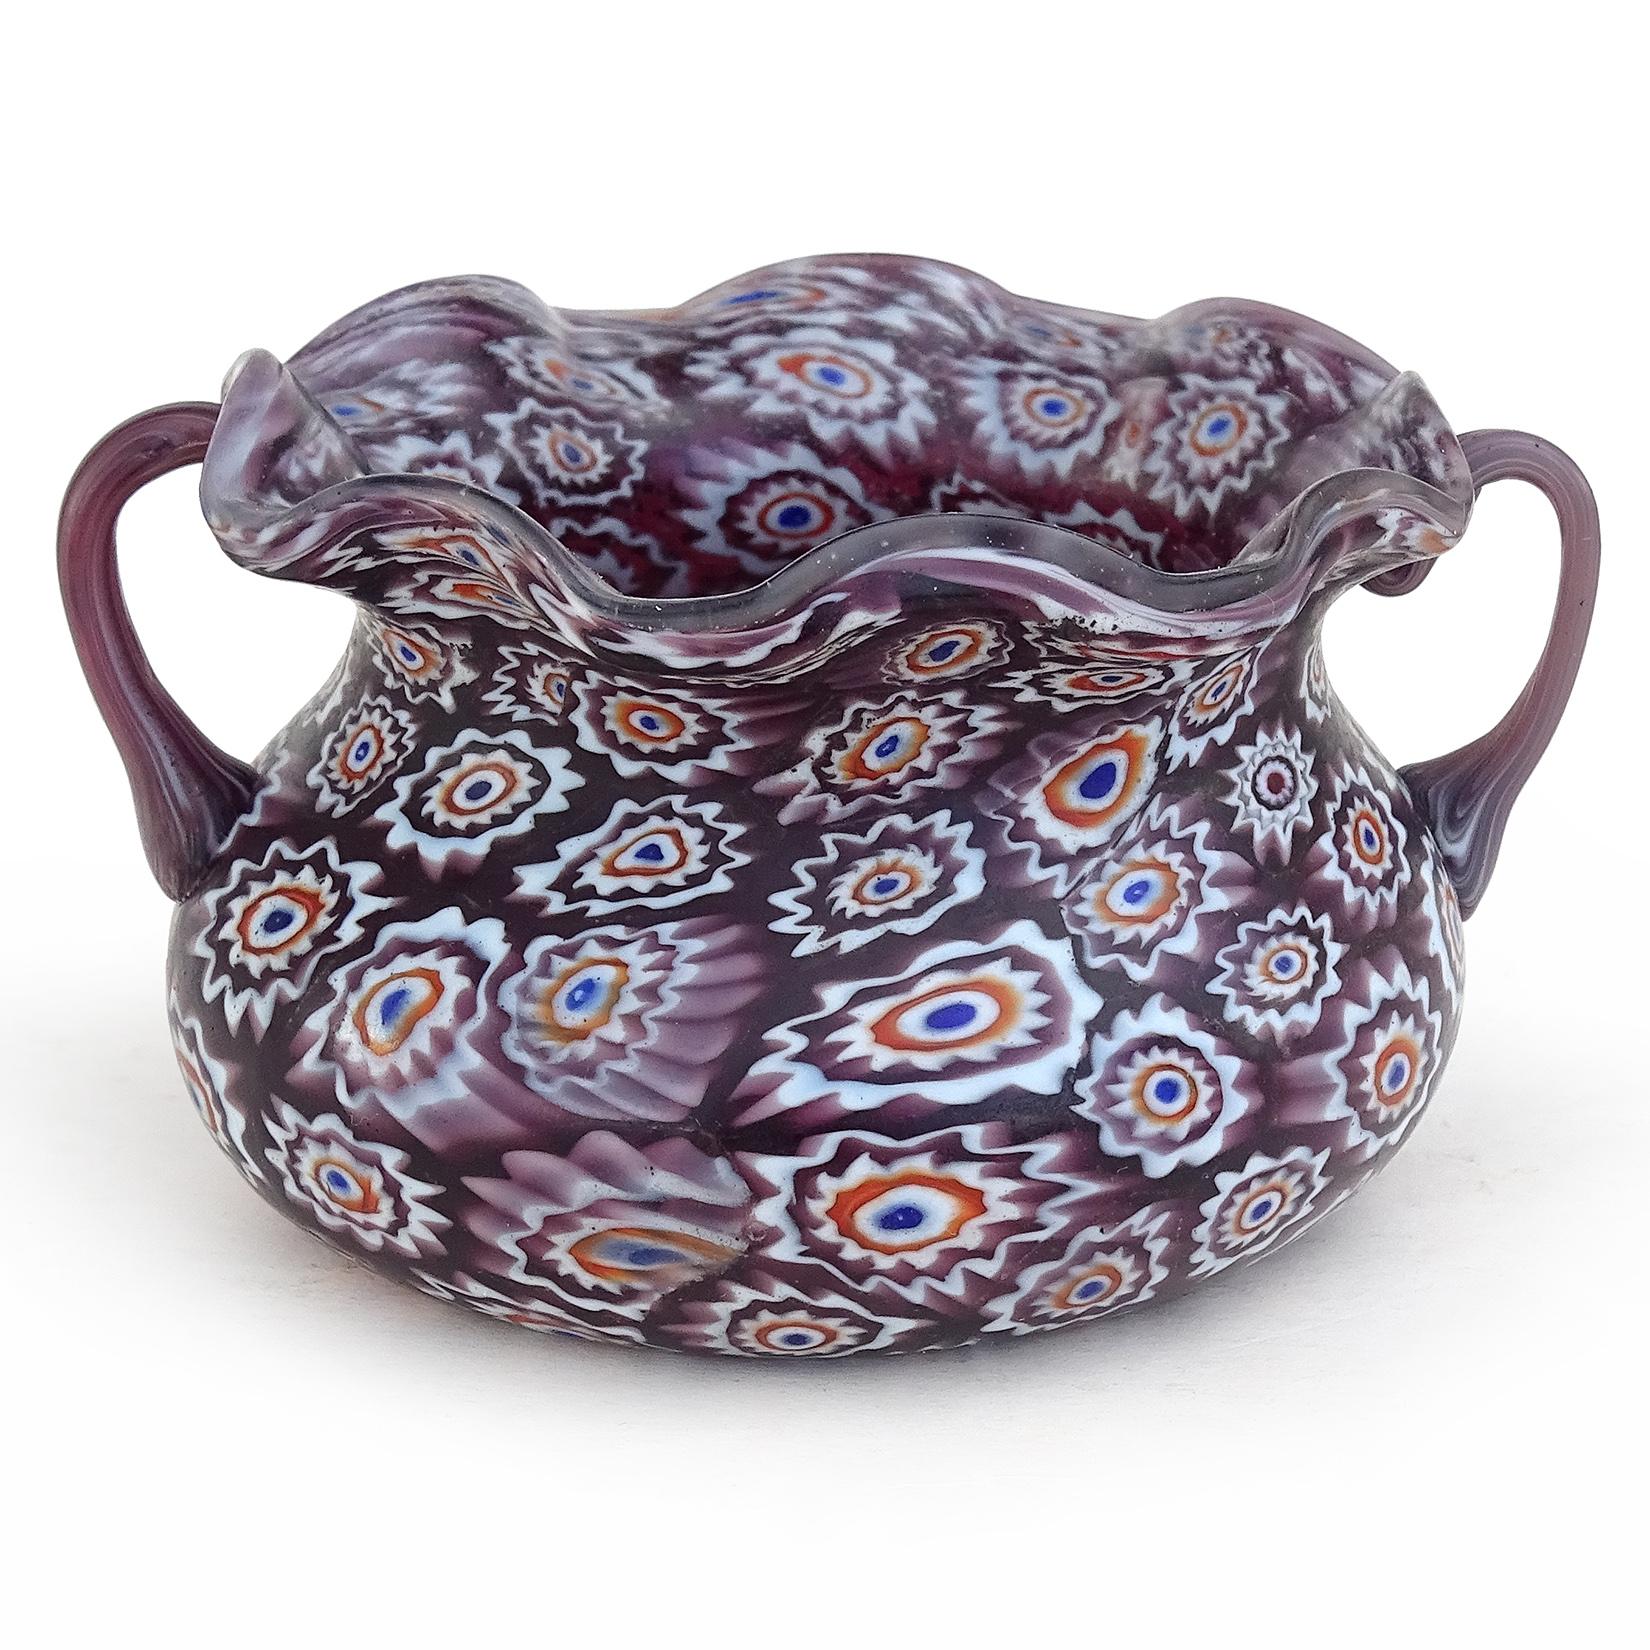 Beautiful antique Murano hand blown millefiori mosaic Italian art glass decorative bowl. Documented to the Fratelli Toso Company, circa 1900-1920. The bowl has a dark purple background color, with white, orange and blue flowers. It has a double